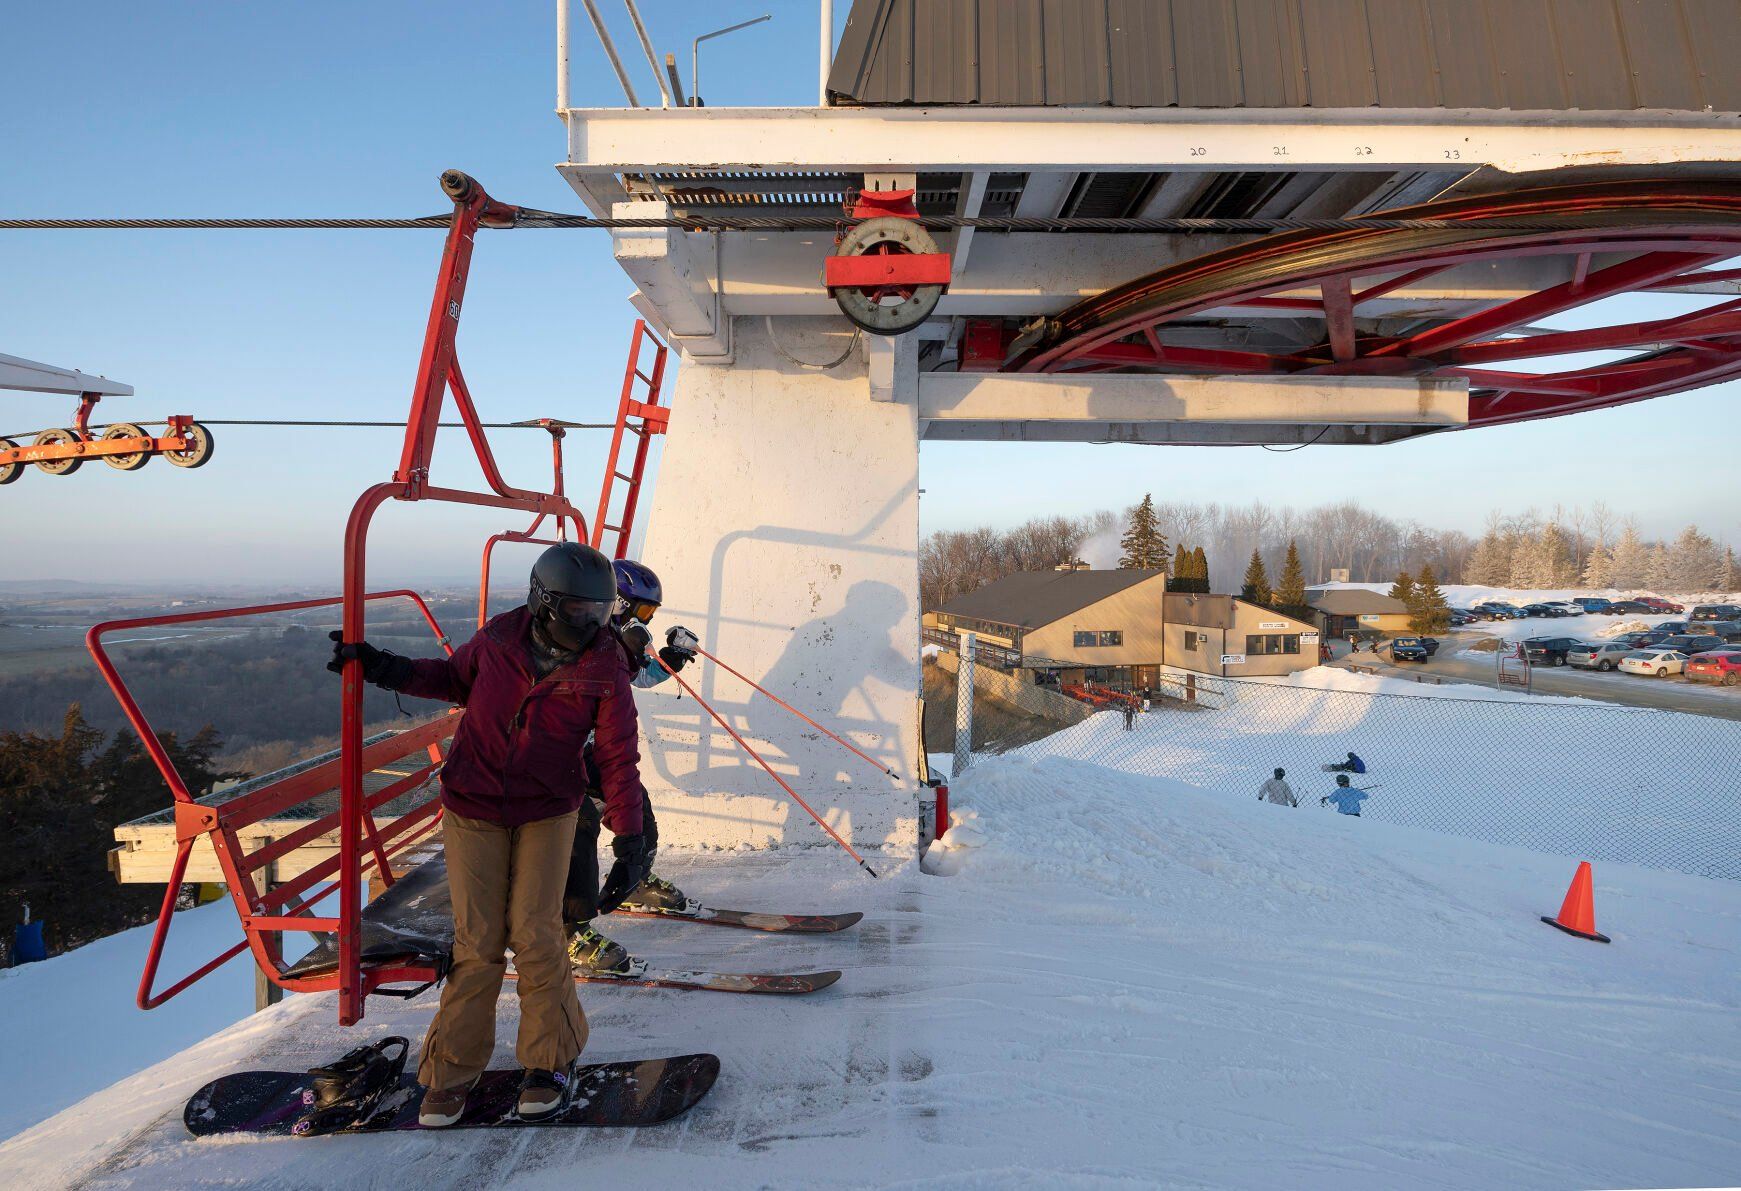 A young skier and snowboarder exit the triple chairlift at Sundown Mountain Resort in Dubuque on Friday, Jan. 6, 2023    PHOTO CREDIT: Stephen Gassman